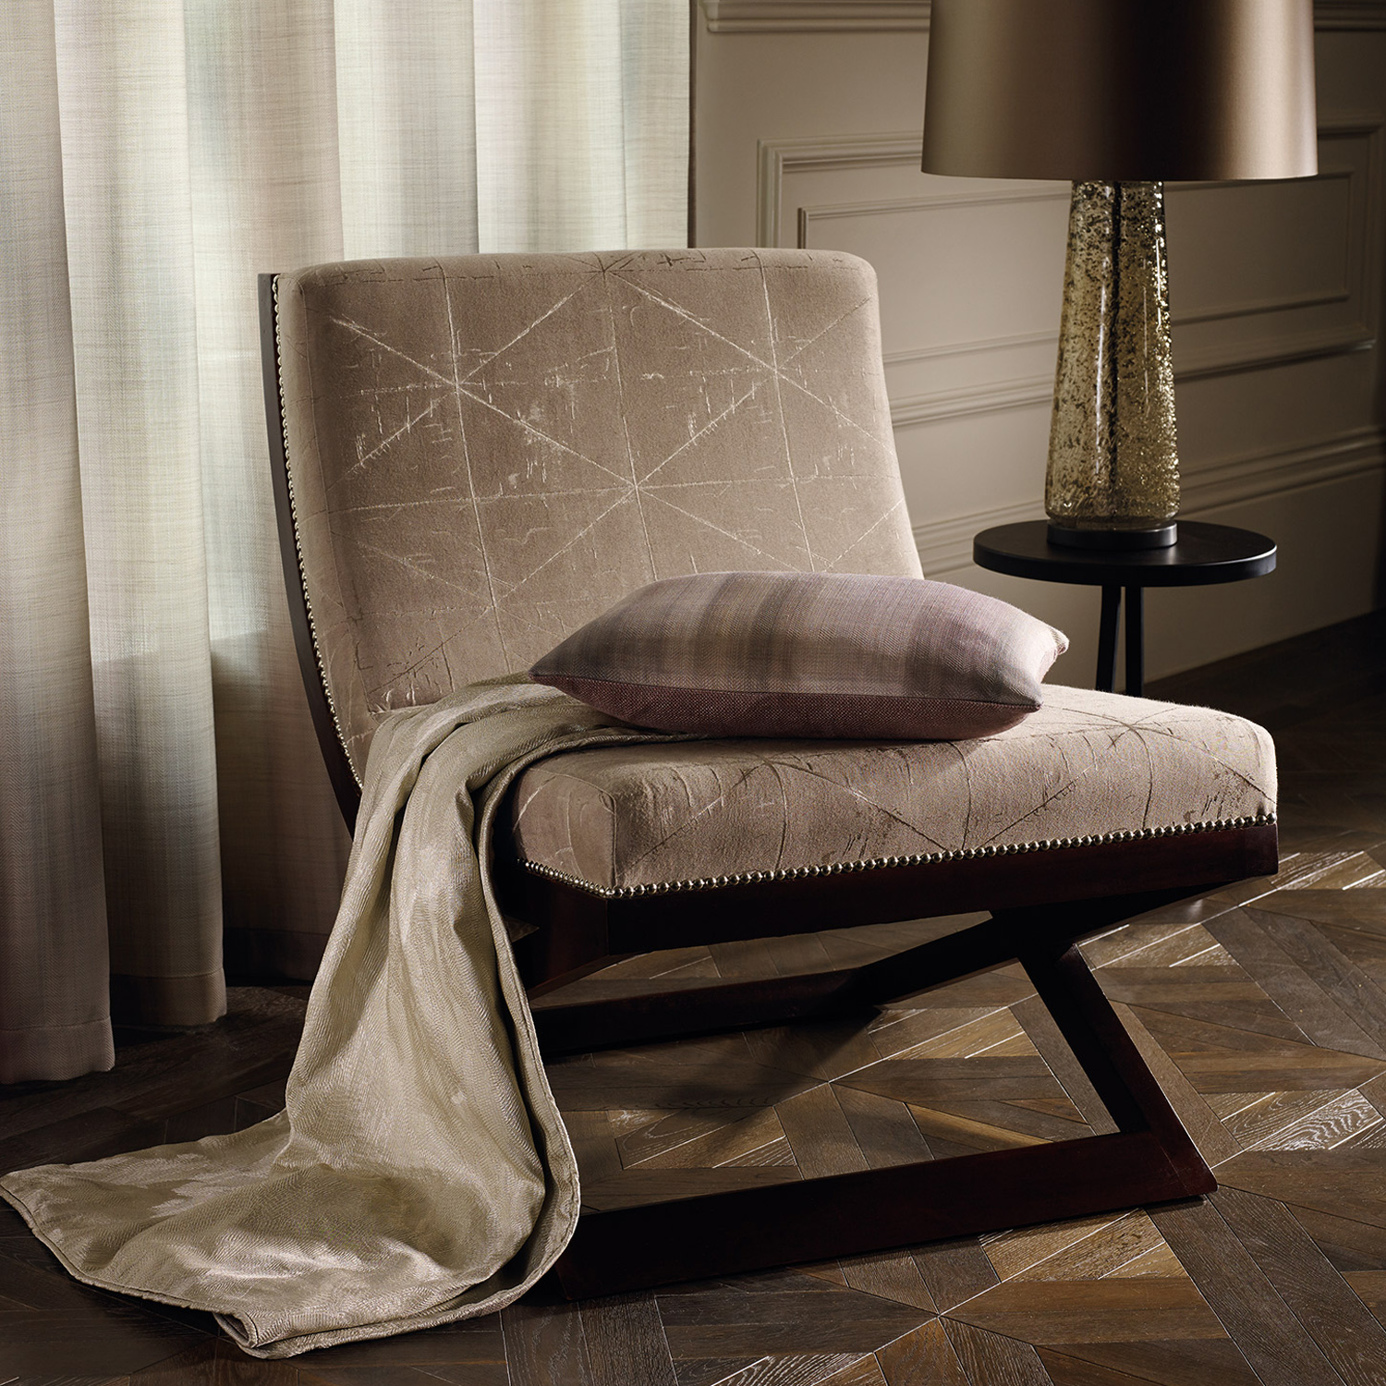 Crease Taupe Fabric by ZOF